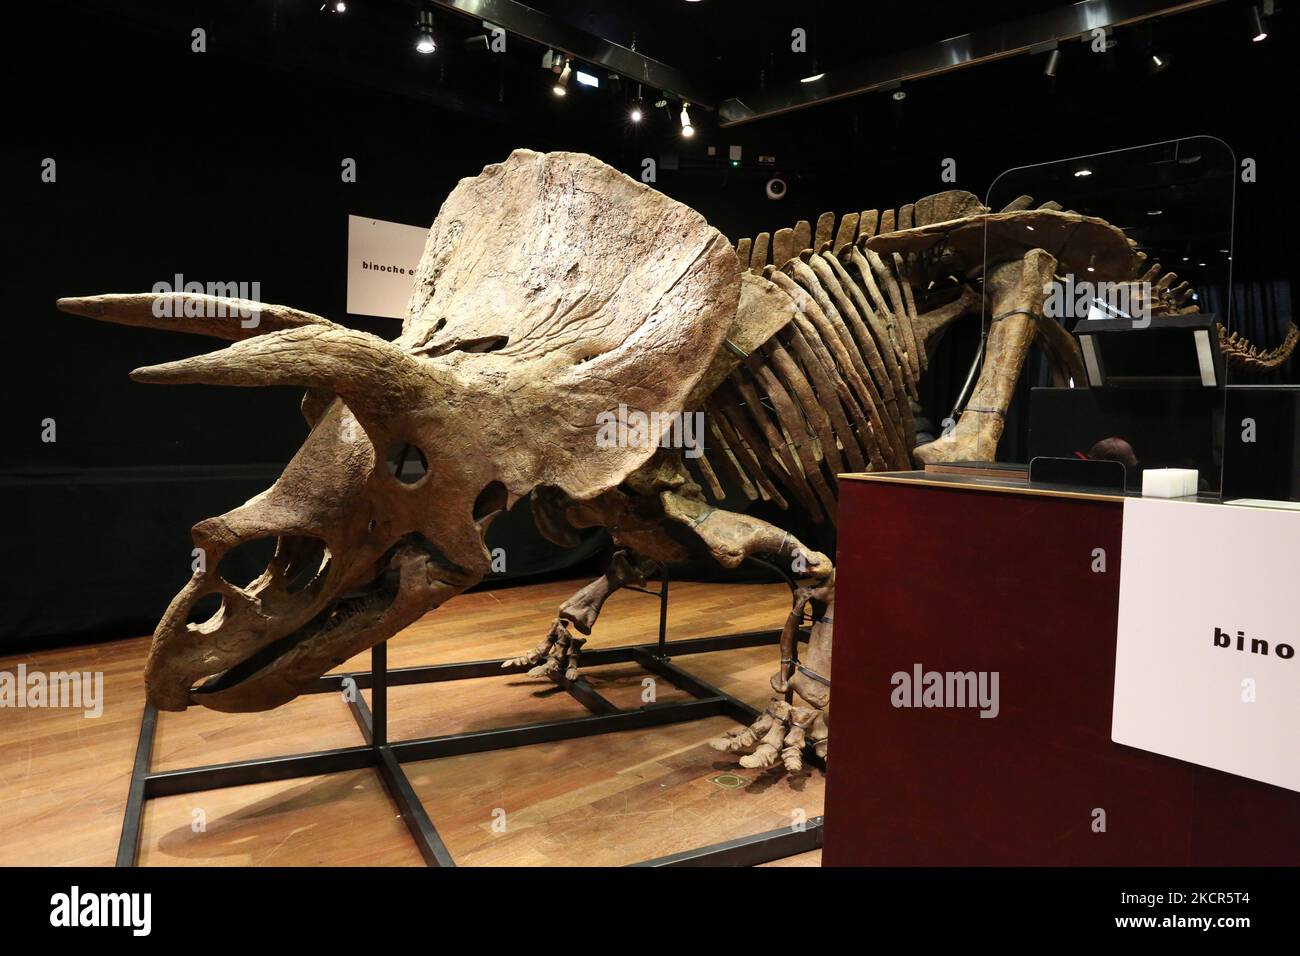 A fossilized triceratops skeleton stands on a metal frame during its auction at the Hôtel Drouot, a famous auction house in Paris, on October 21, 2021. 'Big John', the largest known triceratops ever discovered by paleontologists, over 66 million years old and with an 8-metre long skeleton, was awarded for 5.5 million euros, 6.65 million euros including commissions. It sold to an unidentified private U.S. buyer. (Photo by Michel Stoupak/NurPhoto) Stock Photo